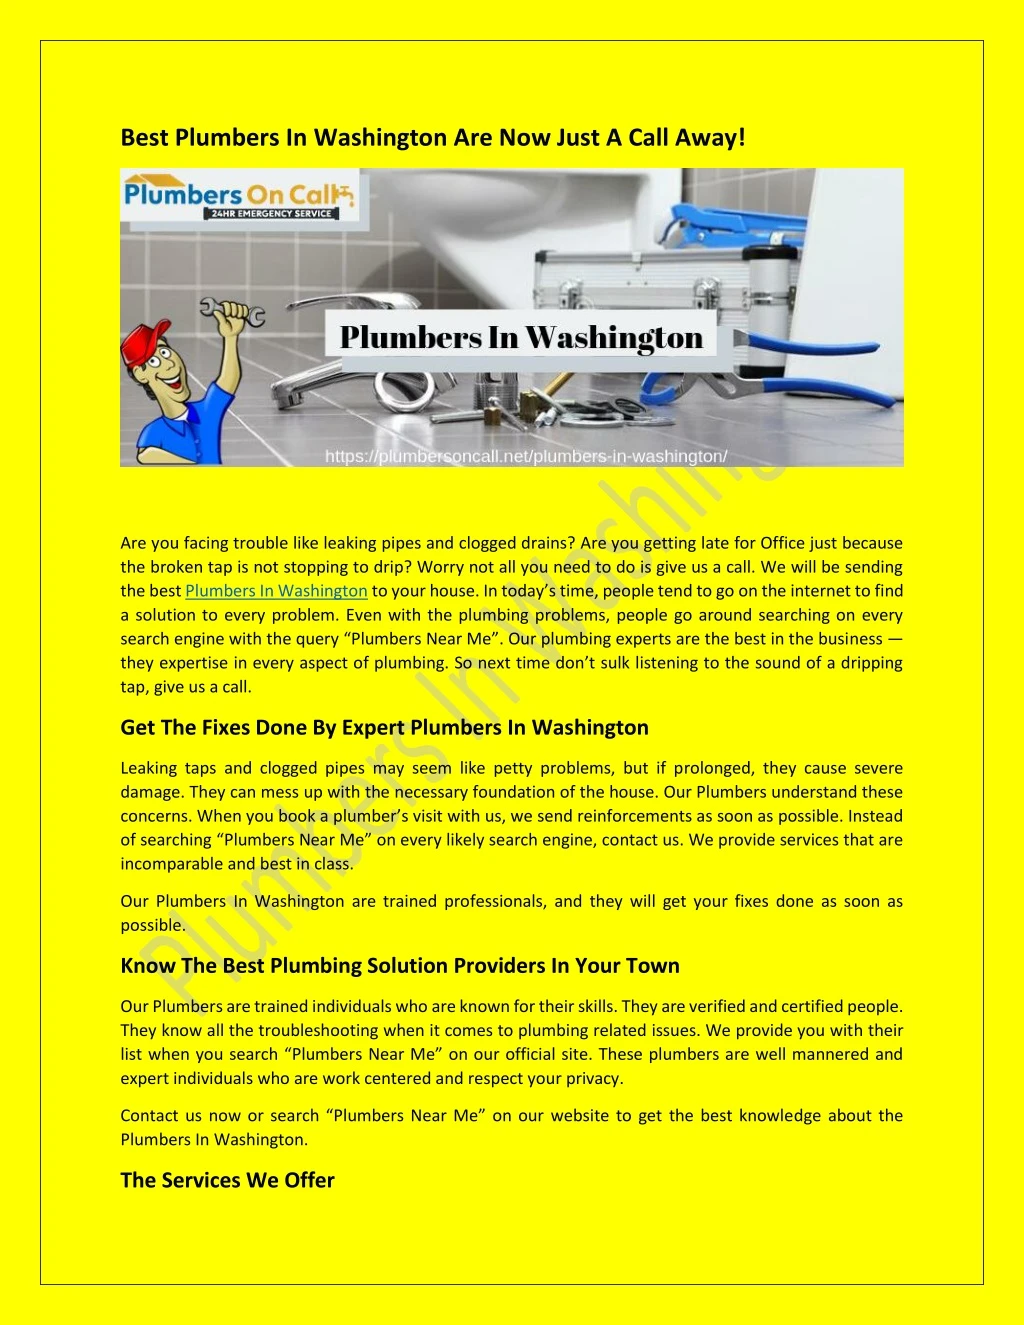 best plumbers in washington are now just a call